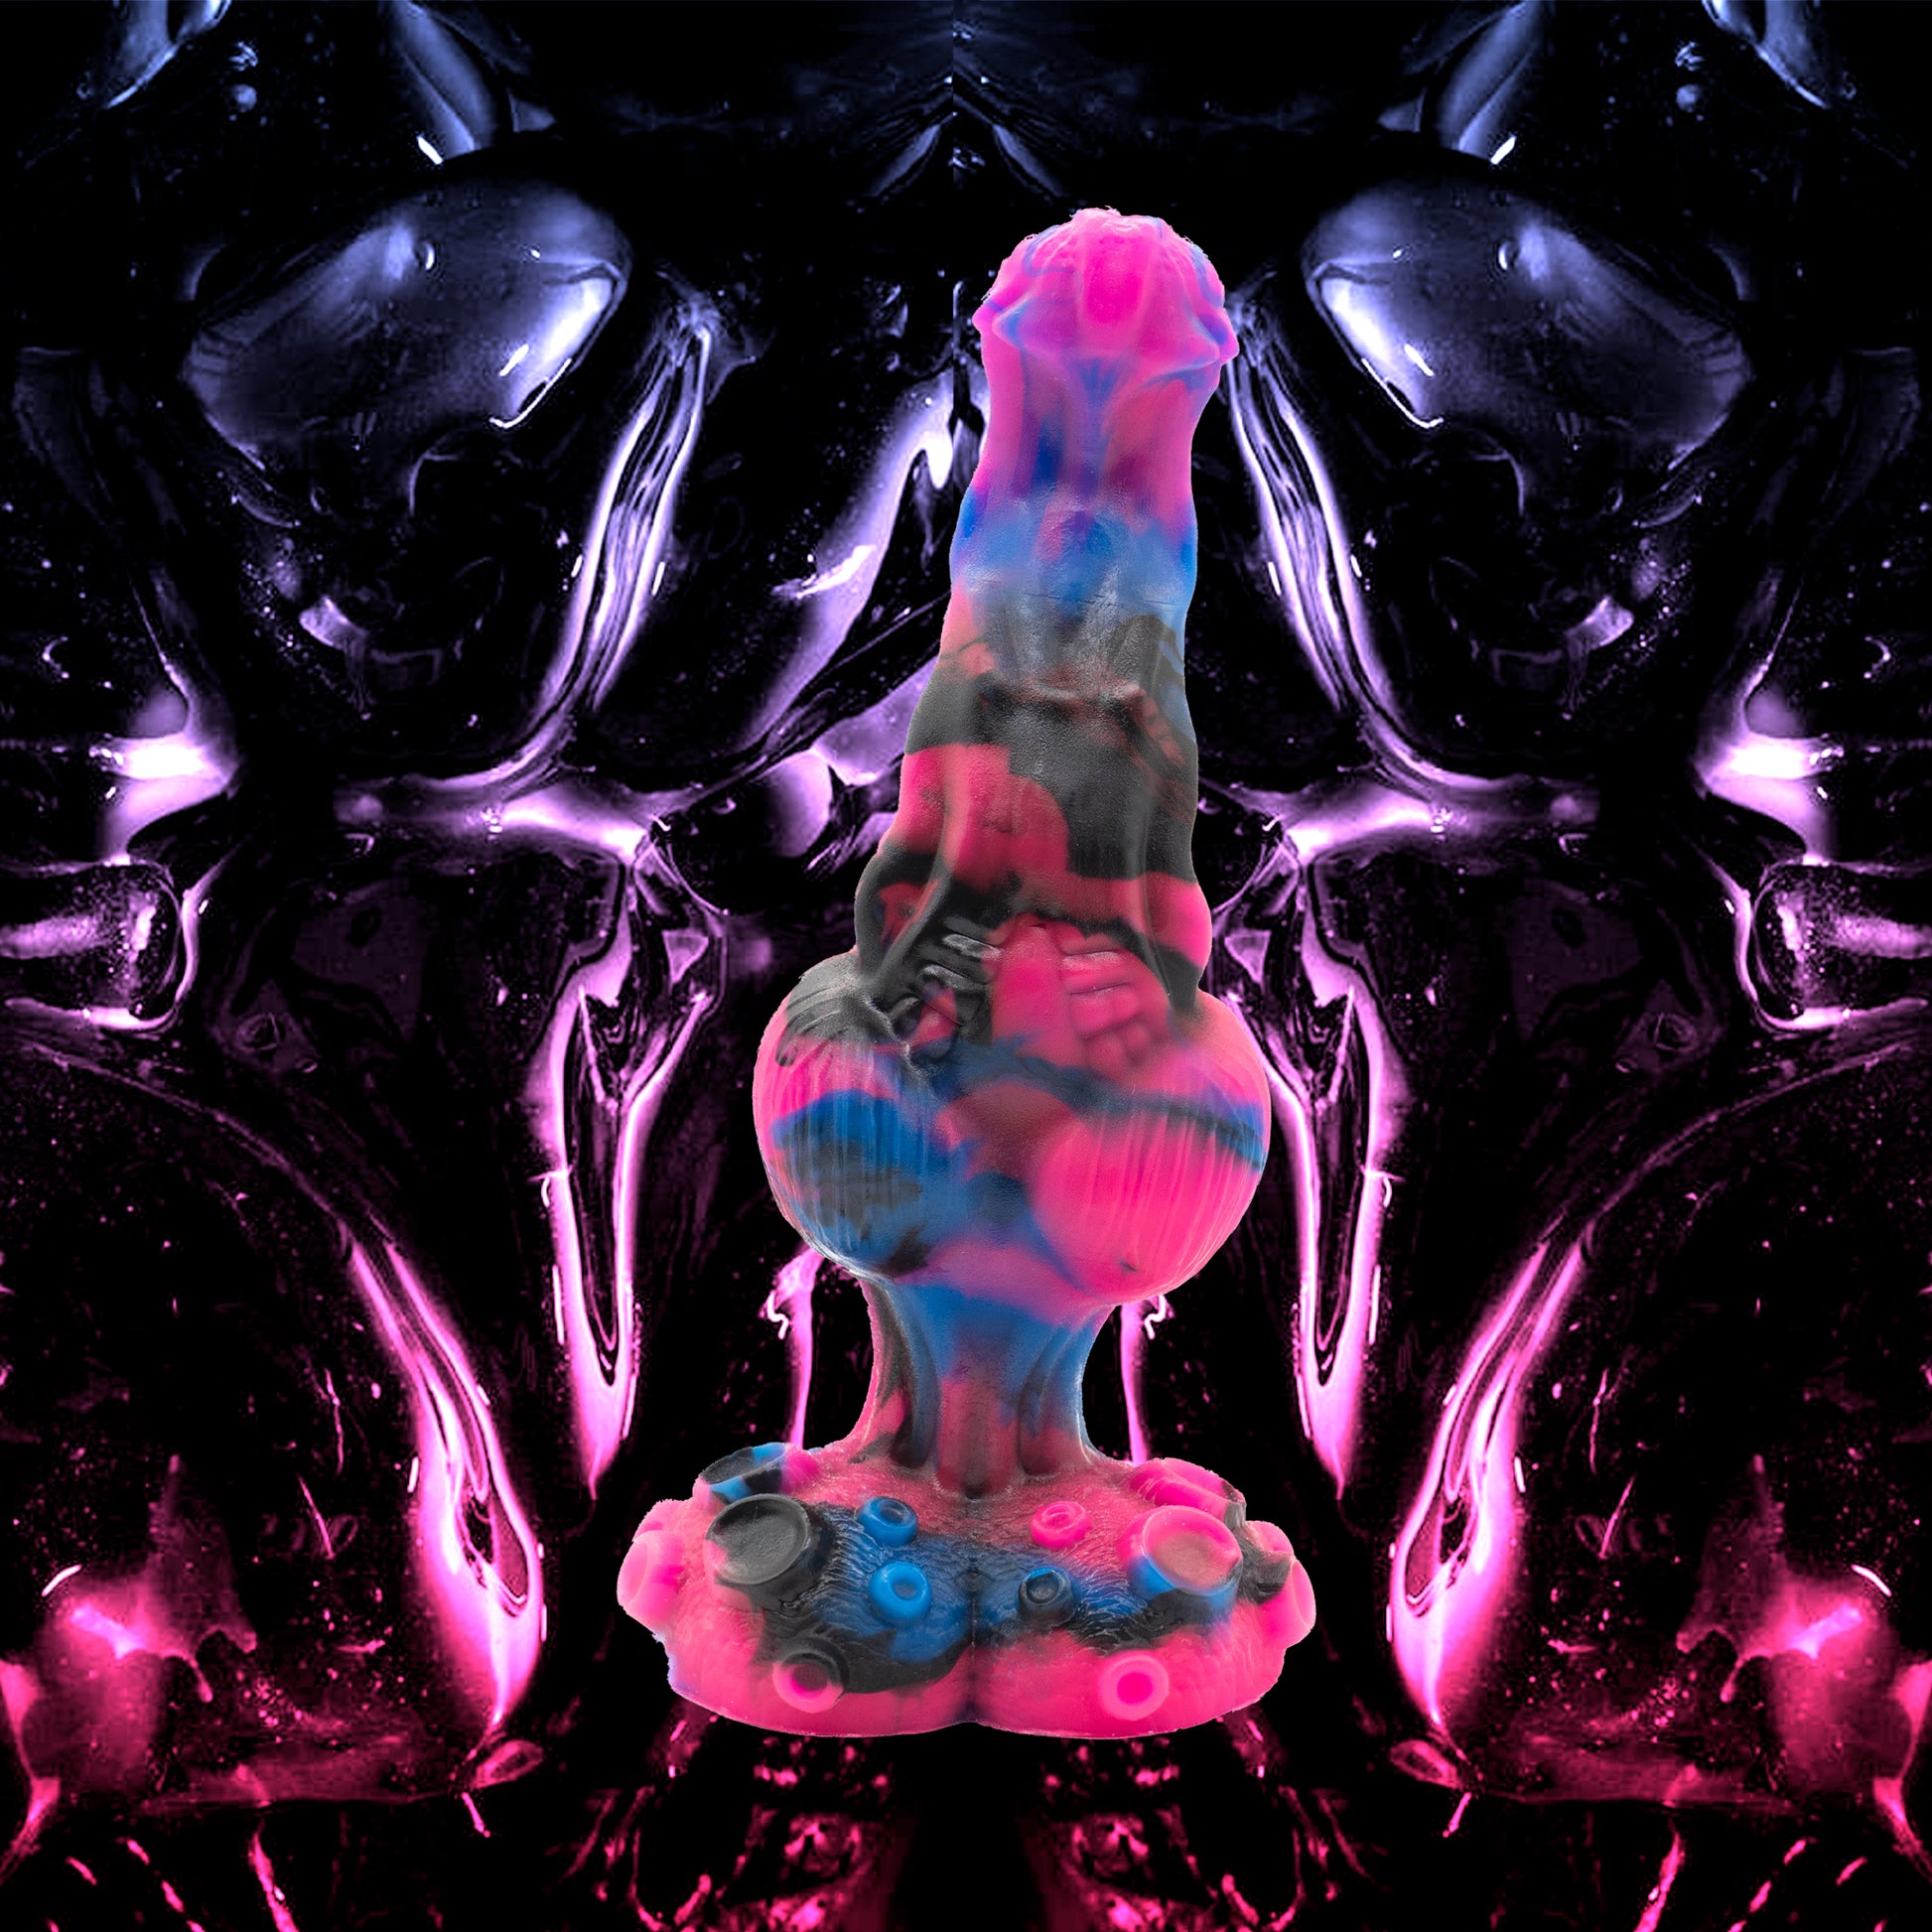 The DOMINUS is a knotted dildo. This monster dildo is a creature from Hell, taking on a seductive form of curves, crevices and a bulbous thick knot to seduce its prey. 